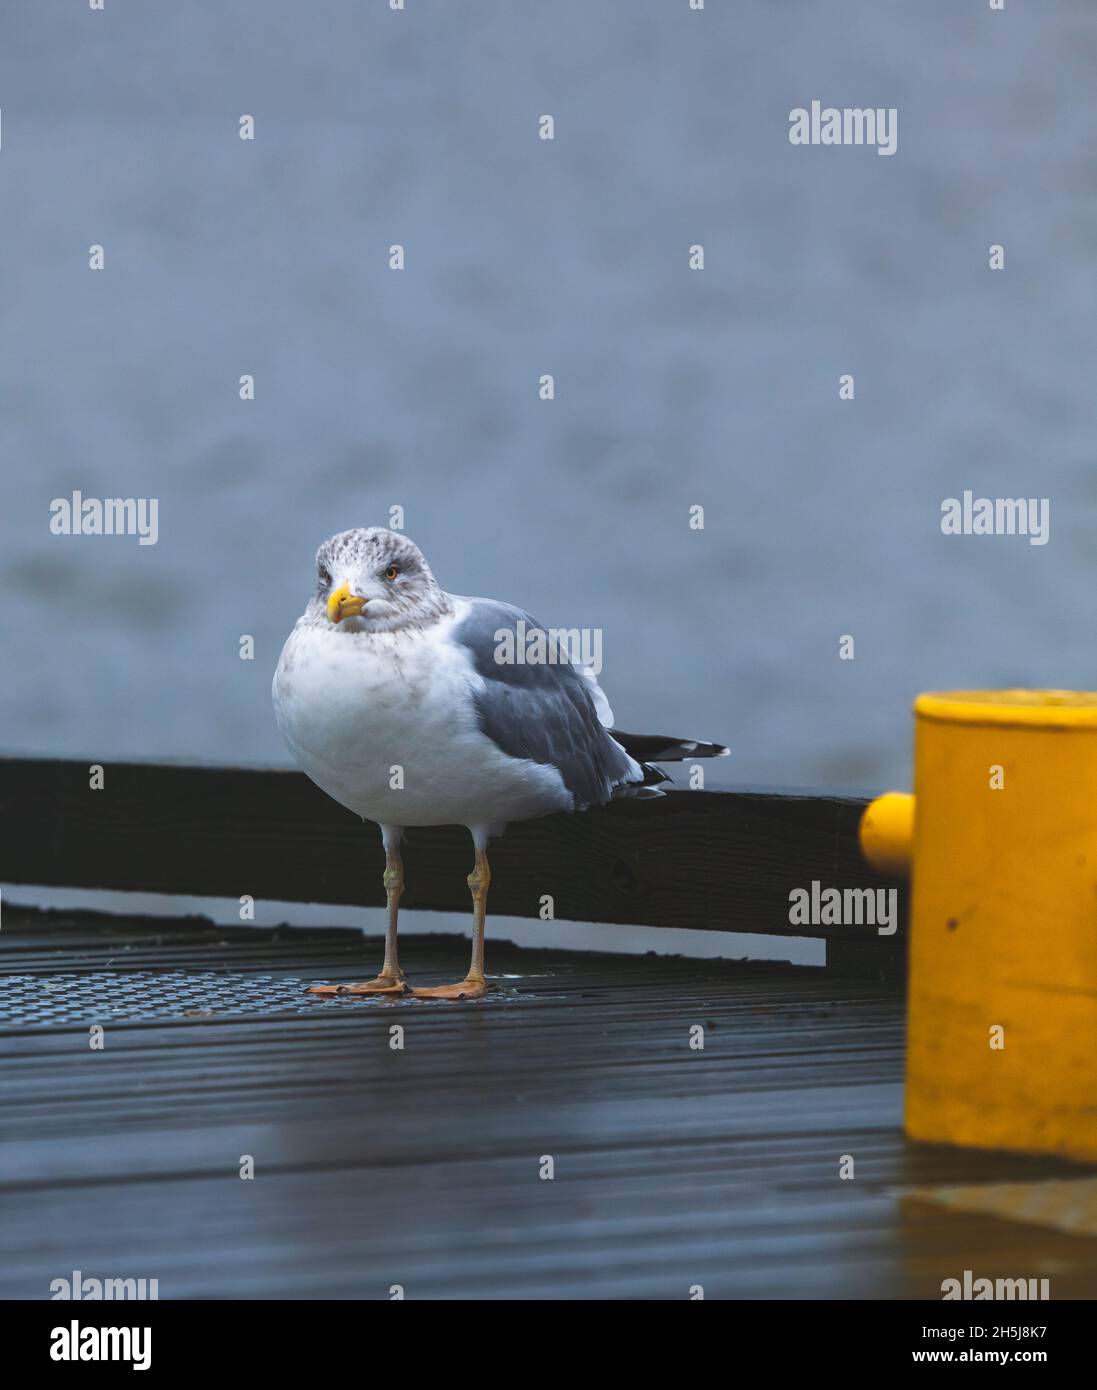 Young seagull on the pier, next to a yellow pole. Waiting for a fishing boat. Cloudy day, blue water in the background. Larus marinus. Stock Photo